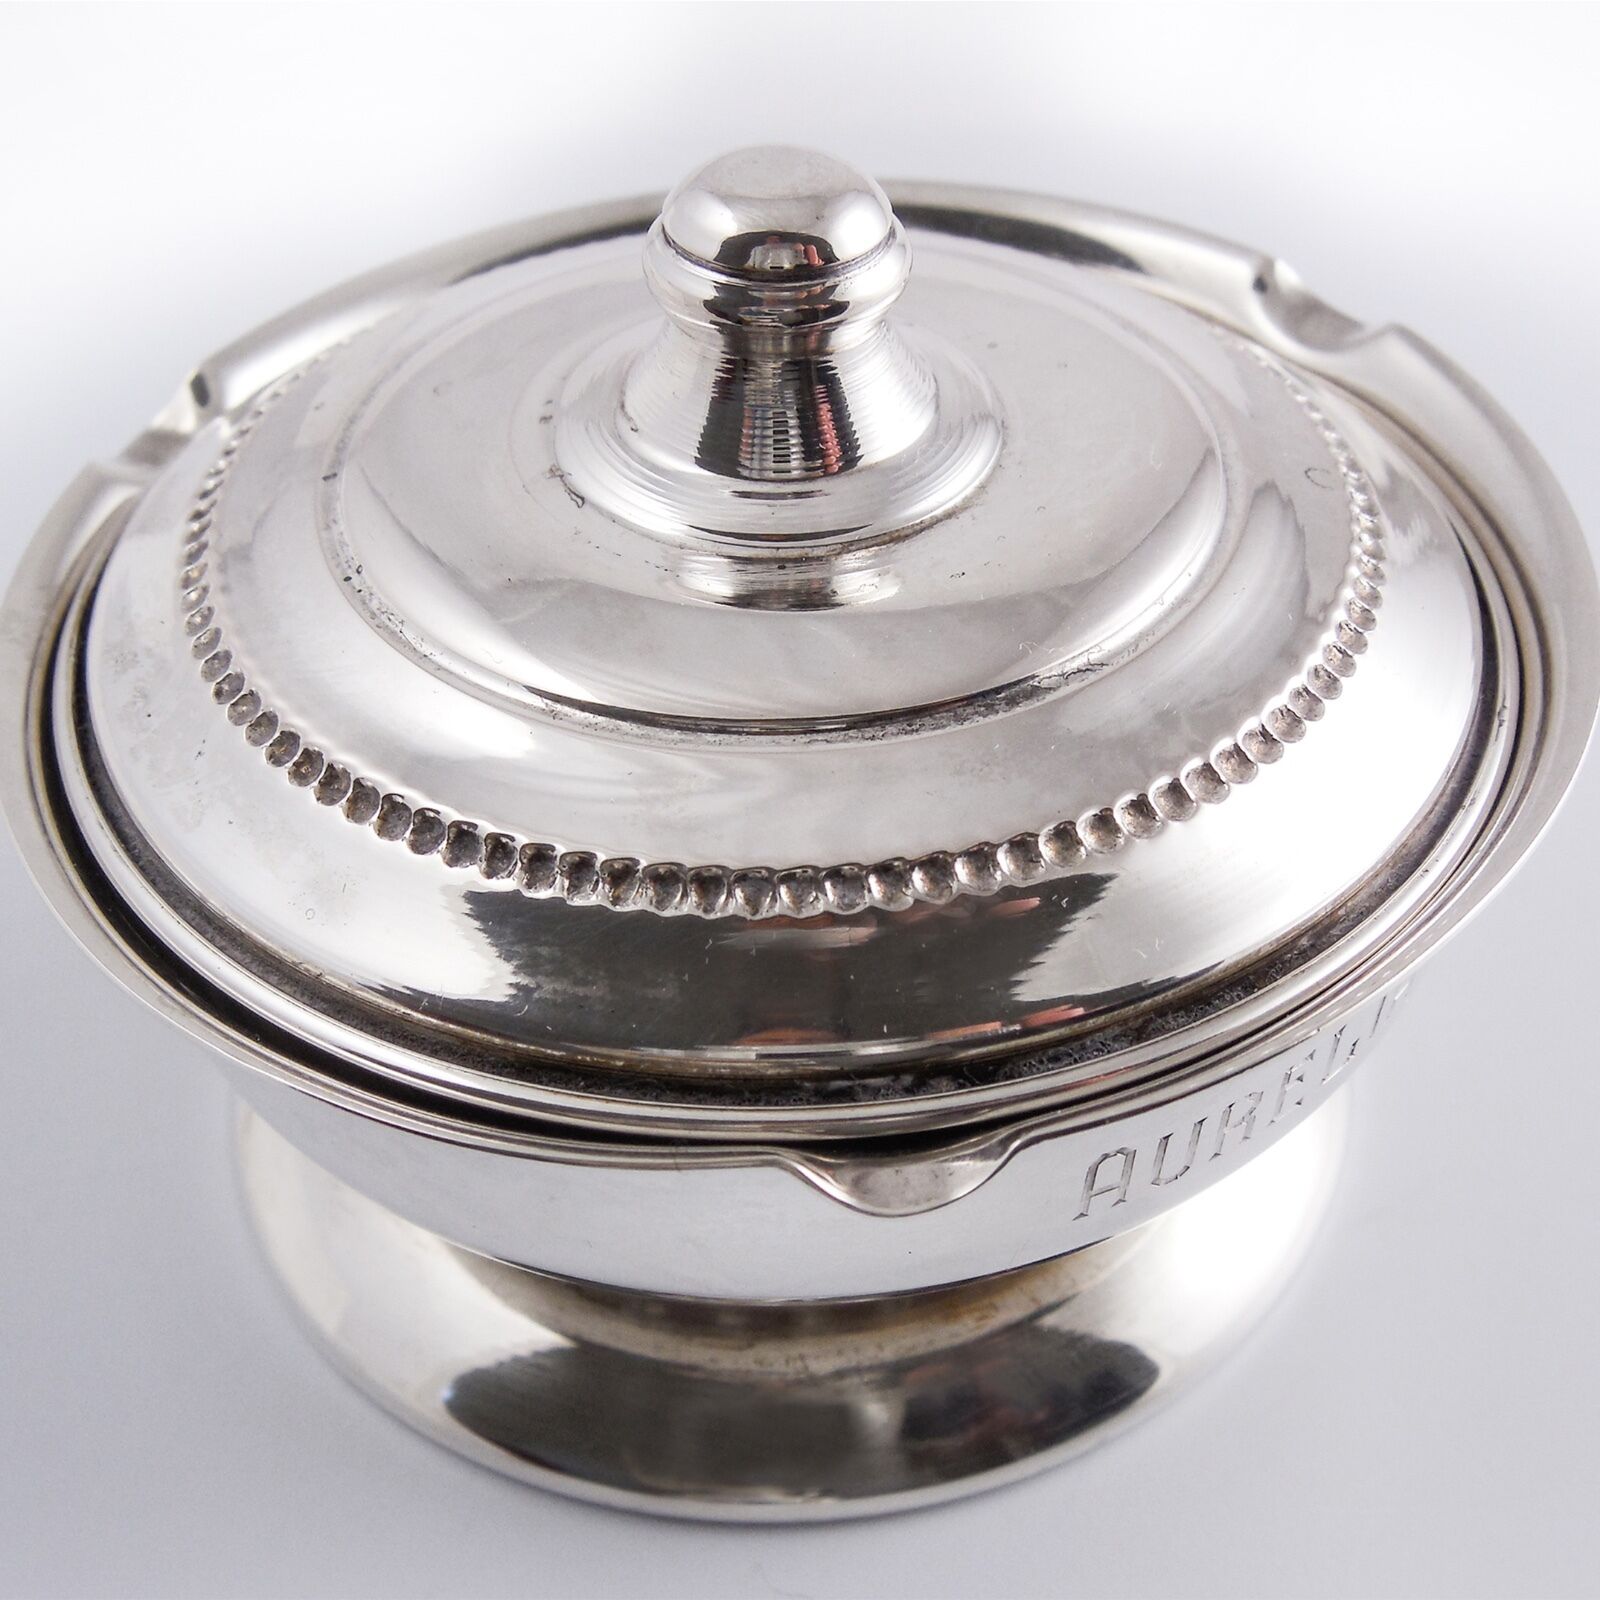 GORHAM STERLING SILVER LIDDED MUSTARD BOWL, — SIGNED, No 825, TIMELESS CLASSIC